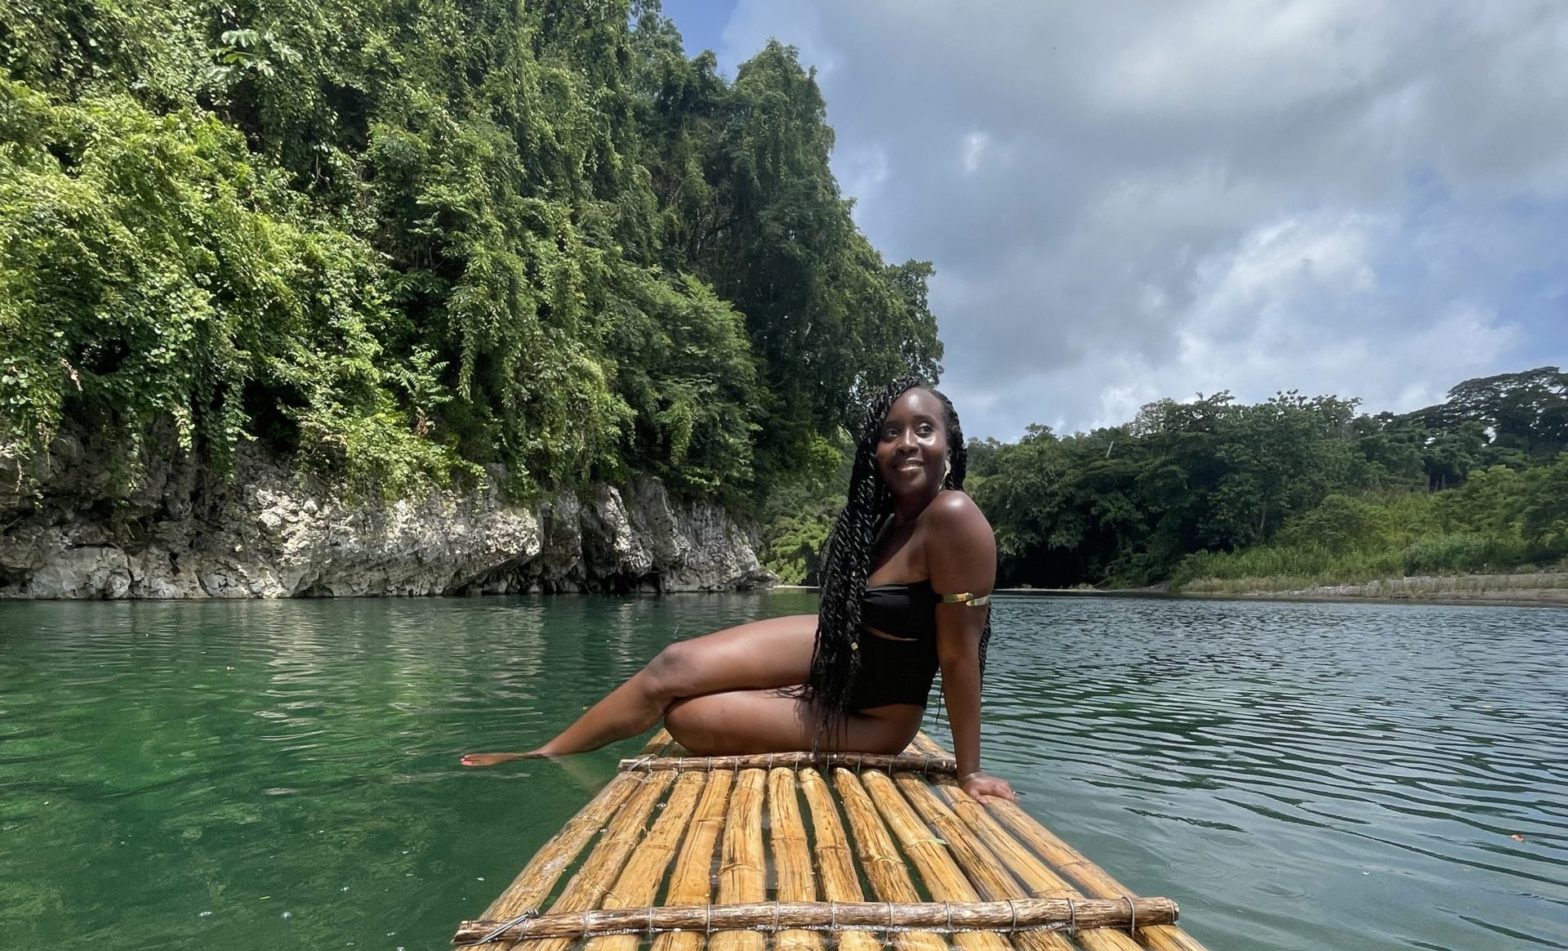 The Best Of Jamaica Like A Local: Travel With Toni-Ann